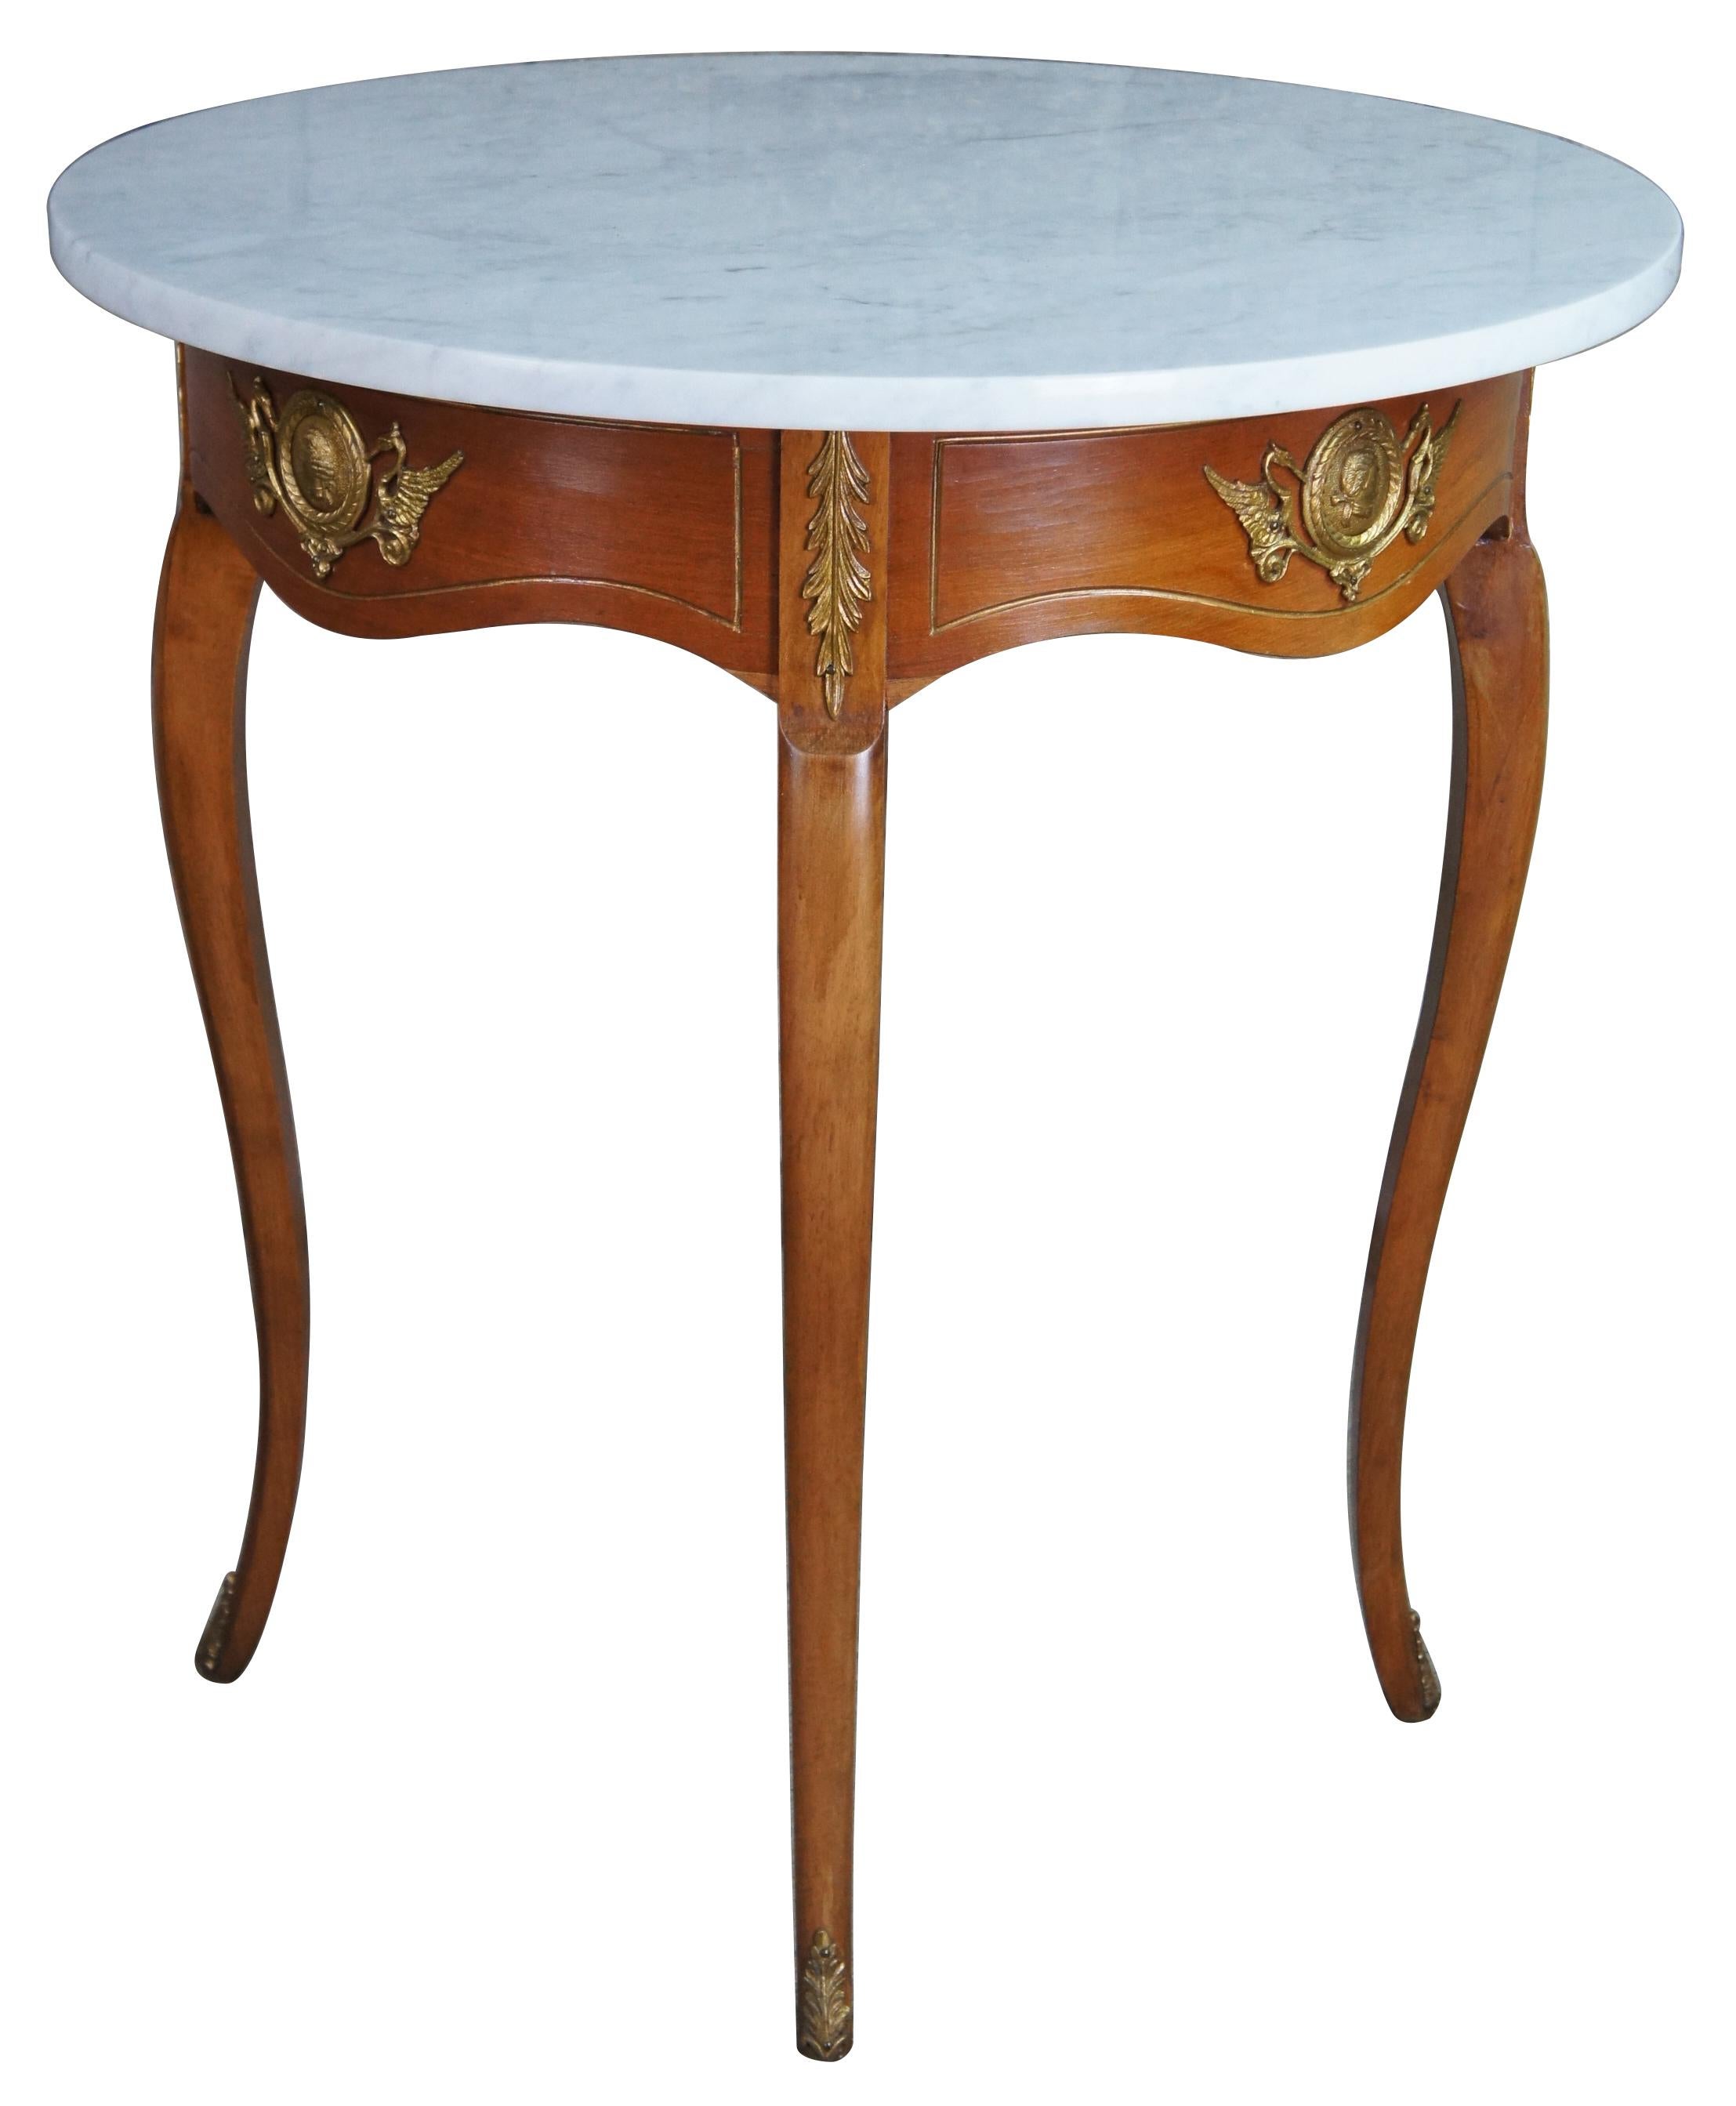 2 Antique Italian Neoclassical Round Marble Fruitwood Gueridon Accent End Tables In Good Condition For Sale In Dayton, OH